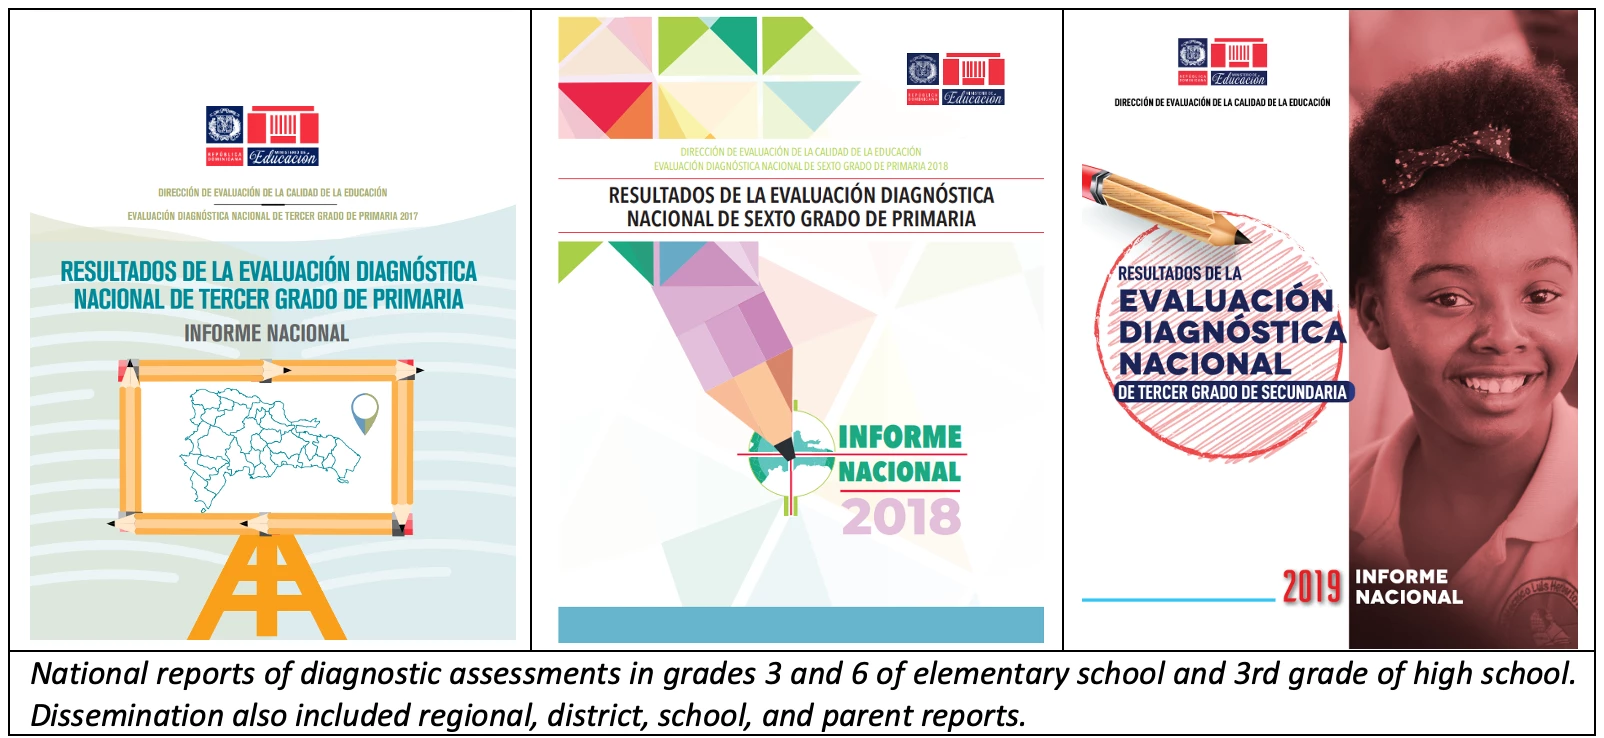 National reports of diagnostic assessments in grades 3 and 6 of elementary school and 3rd grade of high school. Dissemination also included regional, district, school, and parent reports.